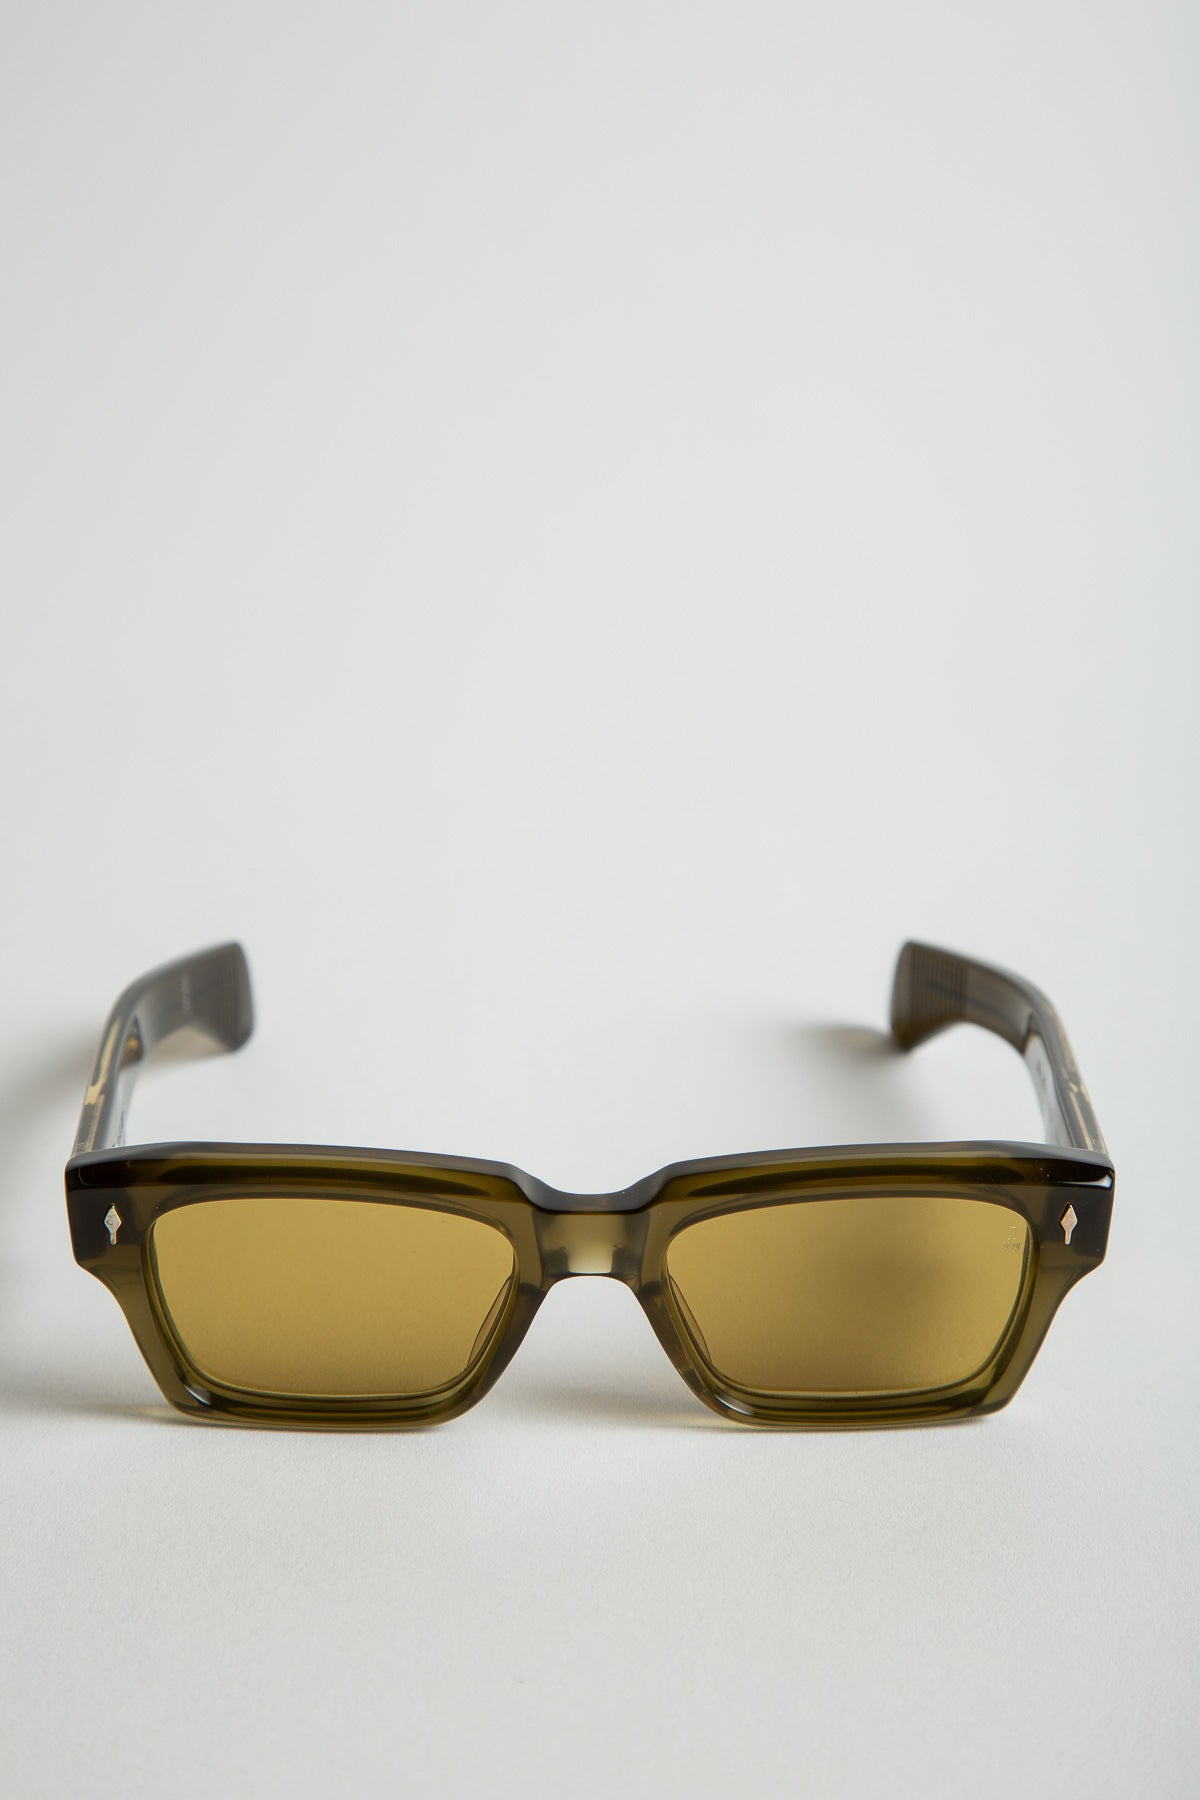 JACQUES MARIE MAGE | ASHCROFT SUNGLASSES